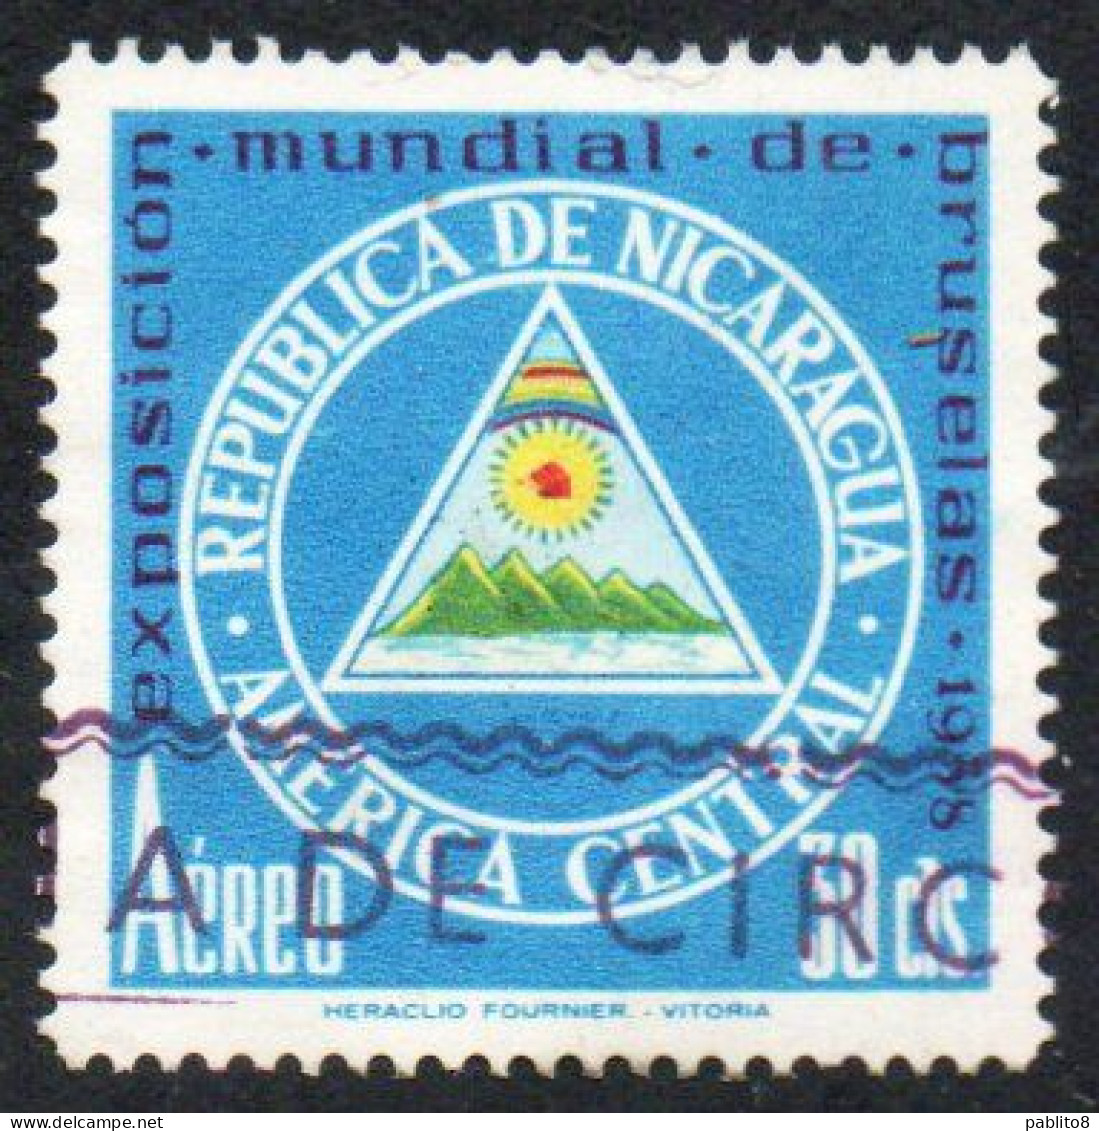 NICARAGUA 1958 WORLD'S FAIR BRUSSELS BRUXELLES ARMS 30c USED USATO OBLITERE' - Nicaragua